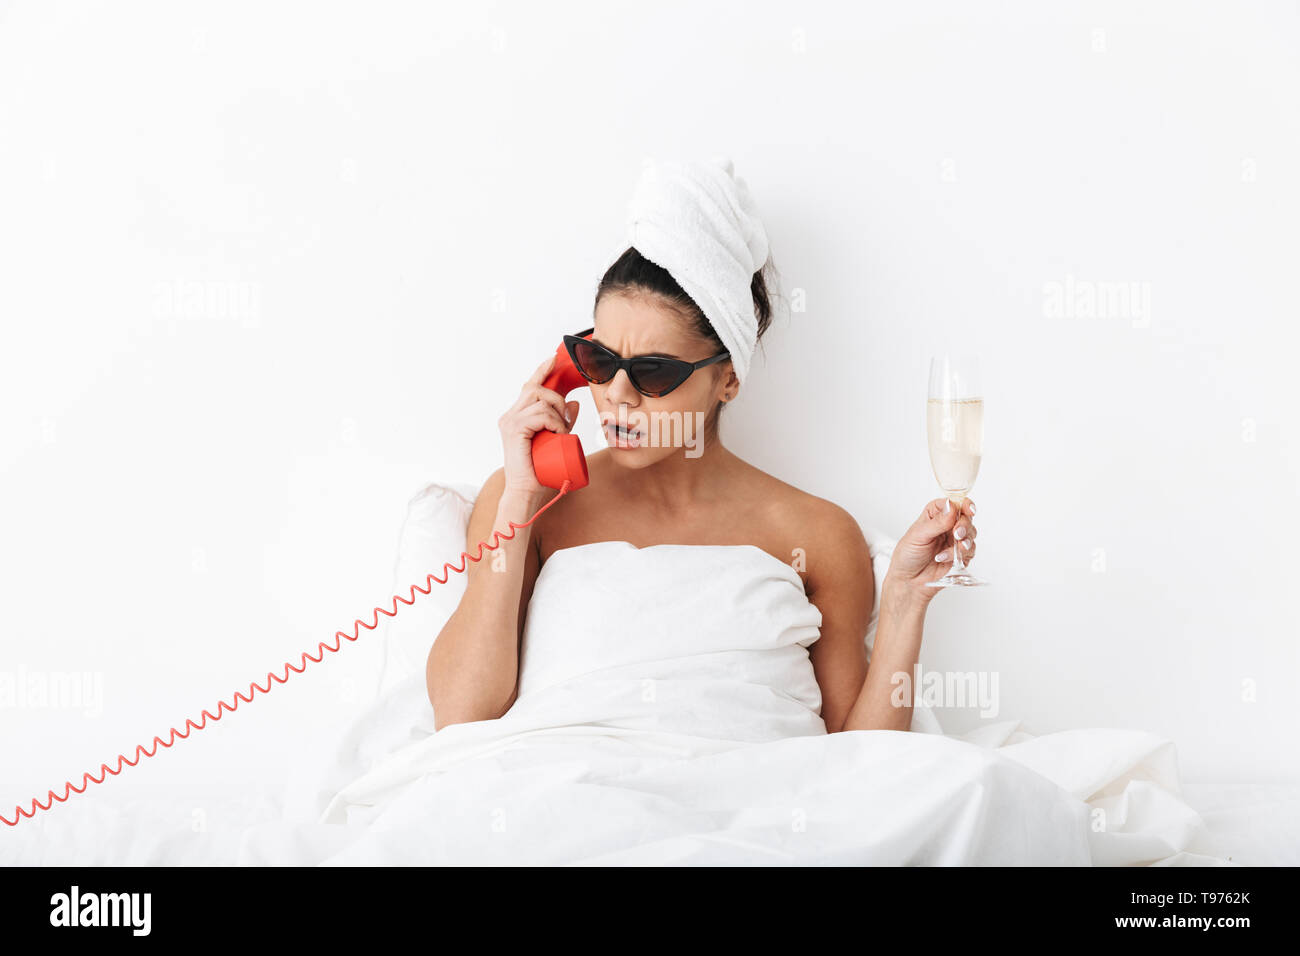 Upset young woman sitting in bed after shower wrapped in blanket, wearing sunglasses, talking on a landline phone, holding glass of champagne Stock Photo